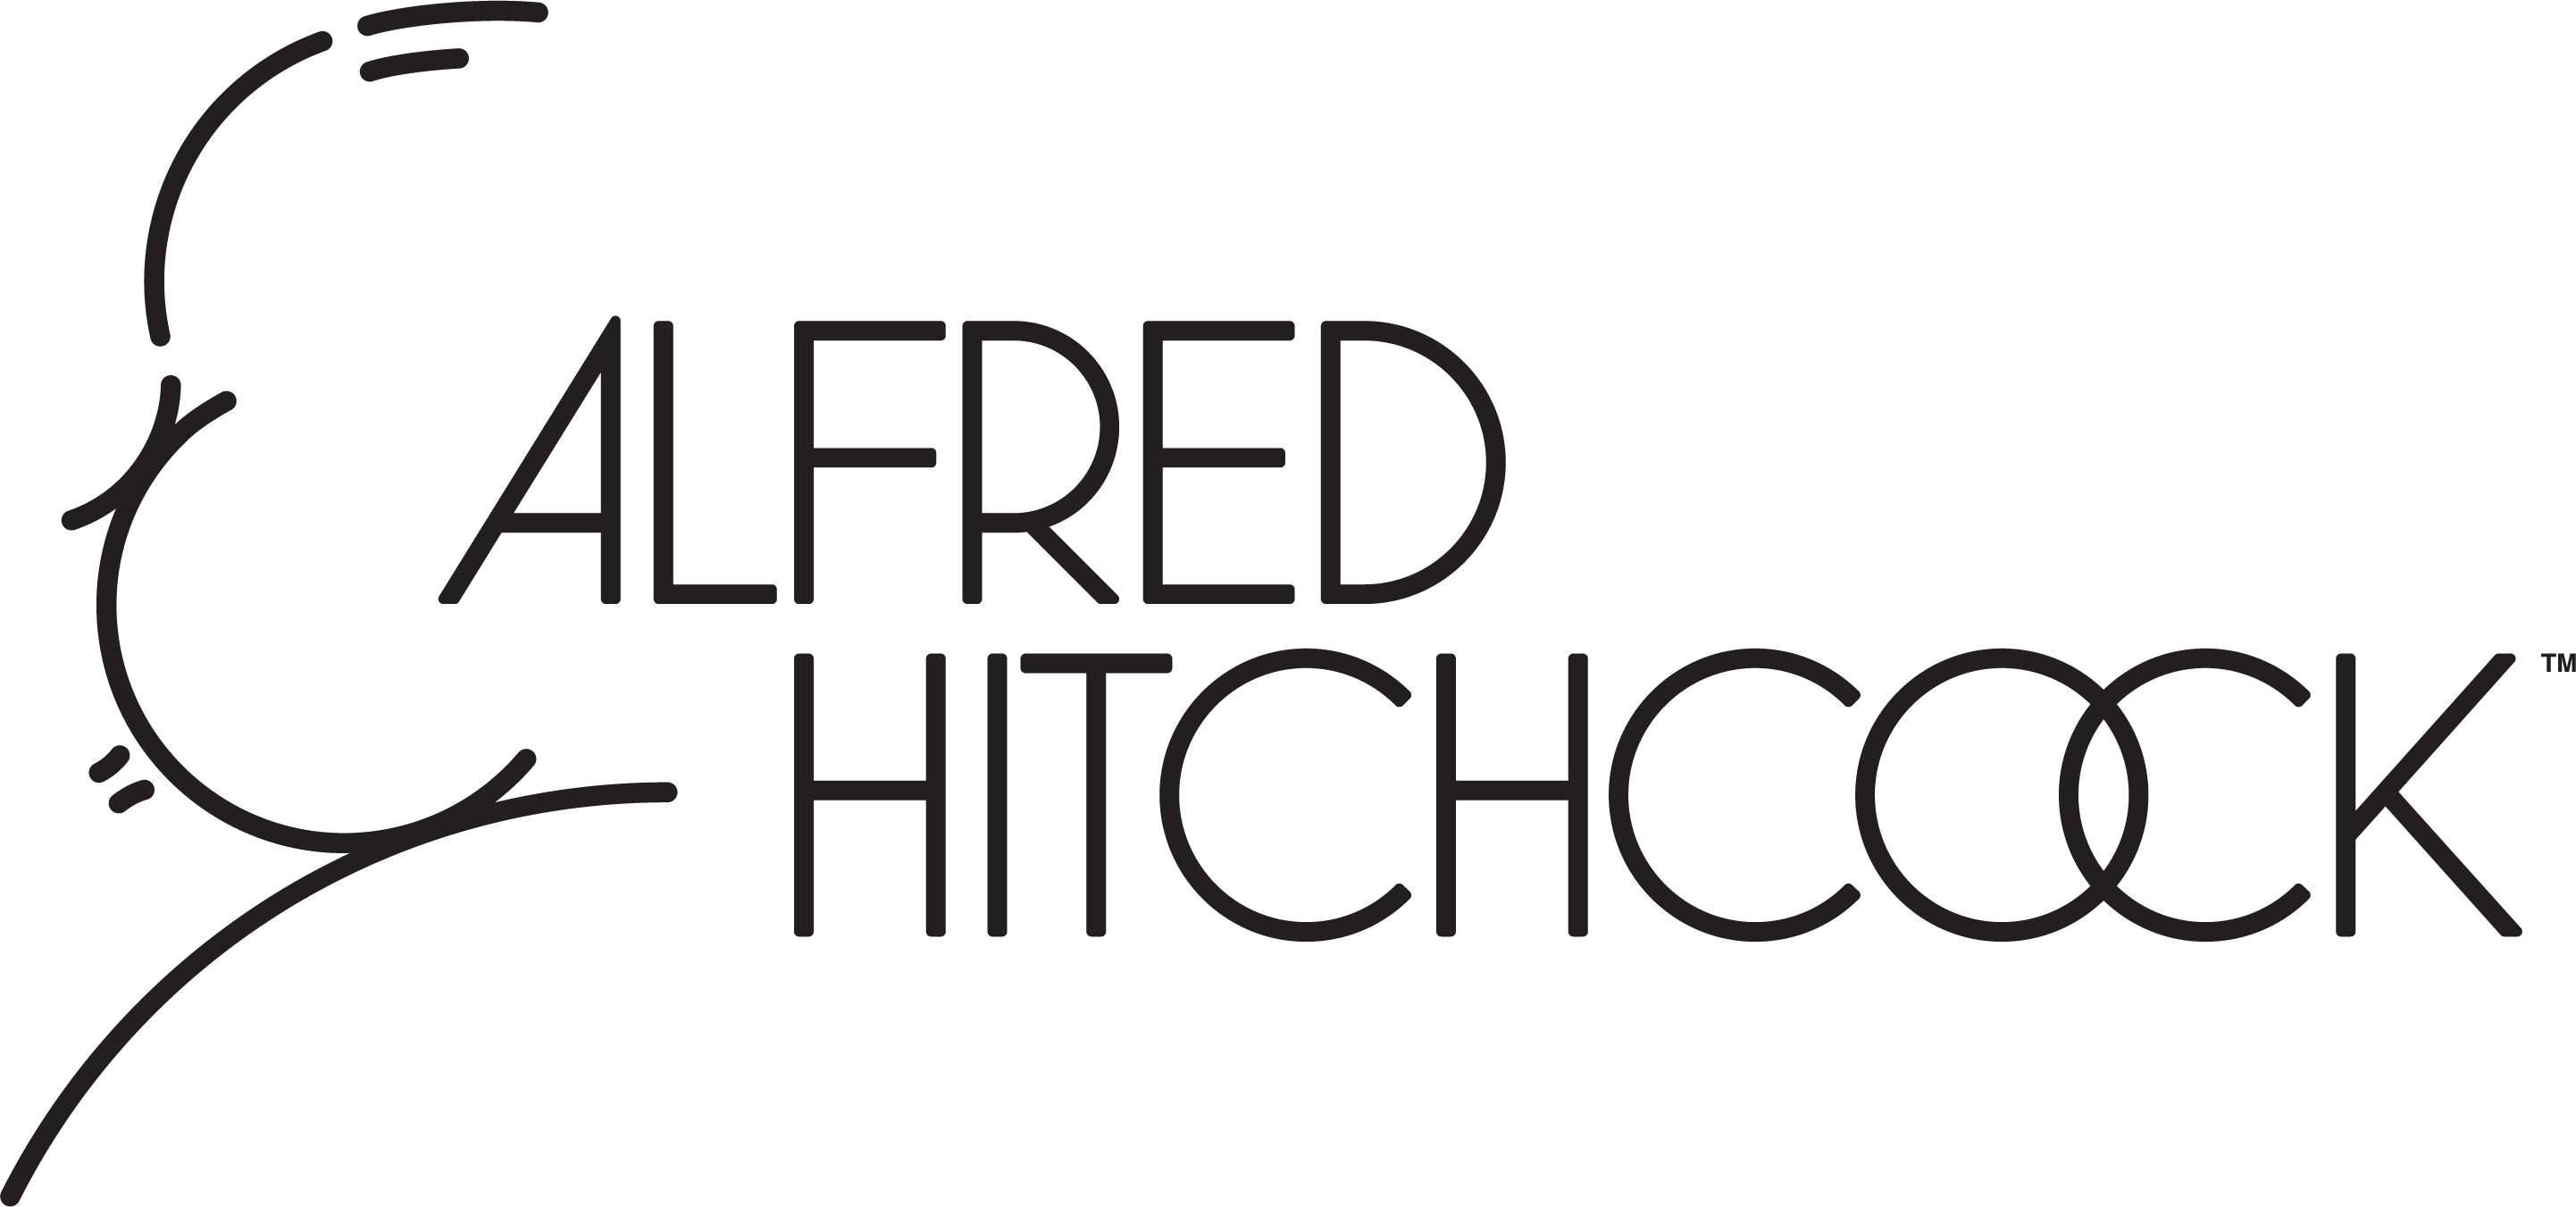 Red Bubble Logo - Guidelines: Alfred Hitchcock